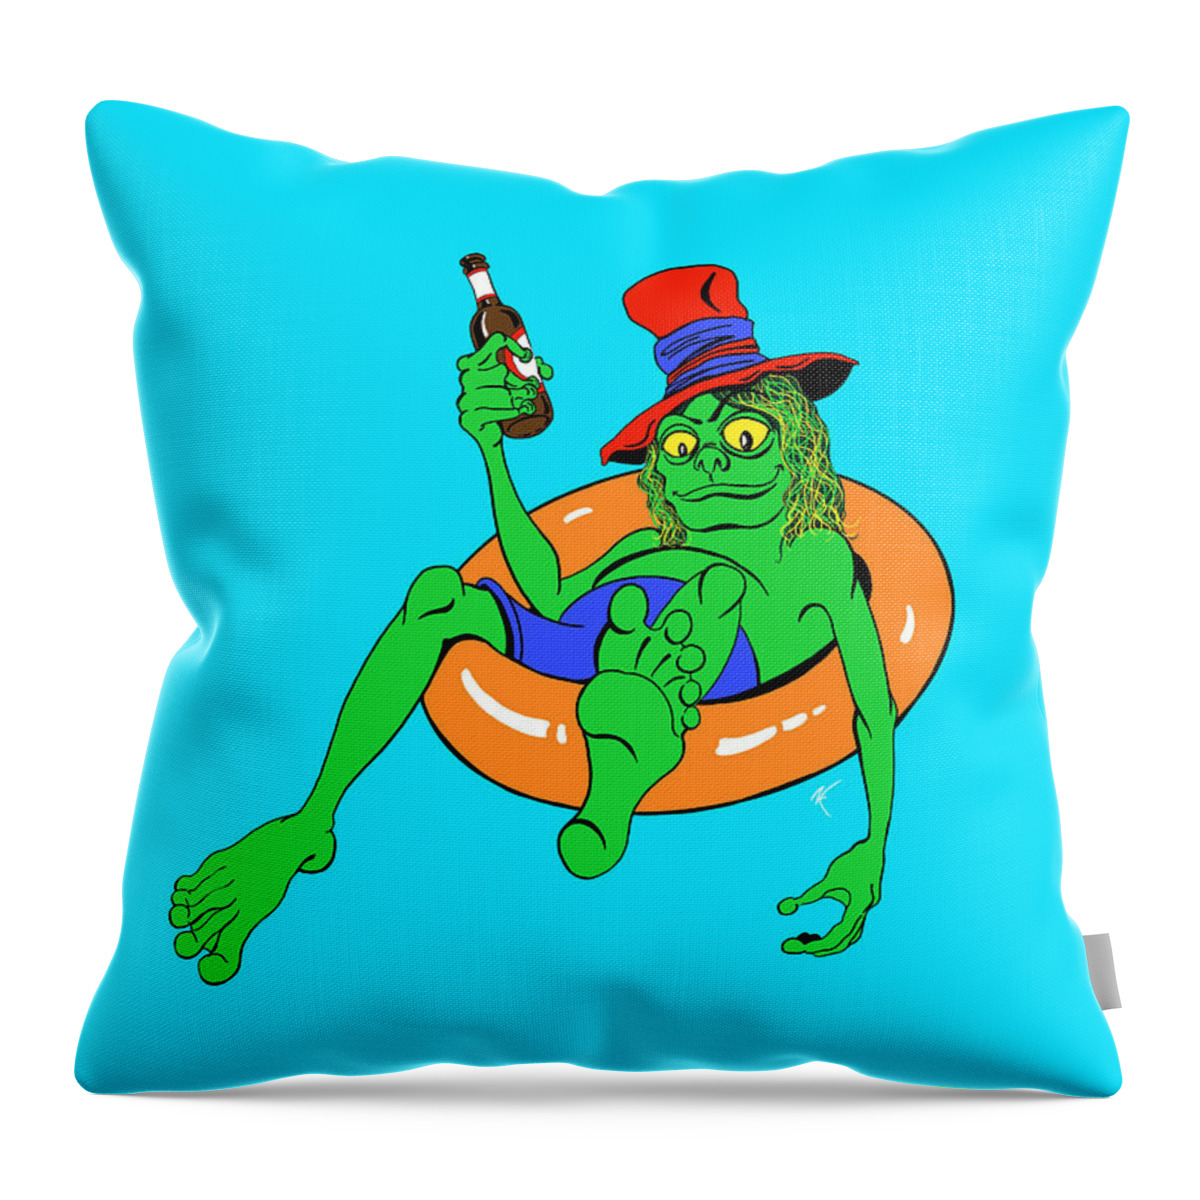 Water Throw Pillow featuring the digital art Vodnik by Norman Klein